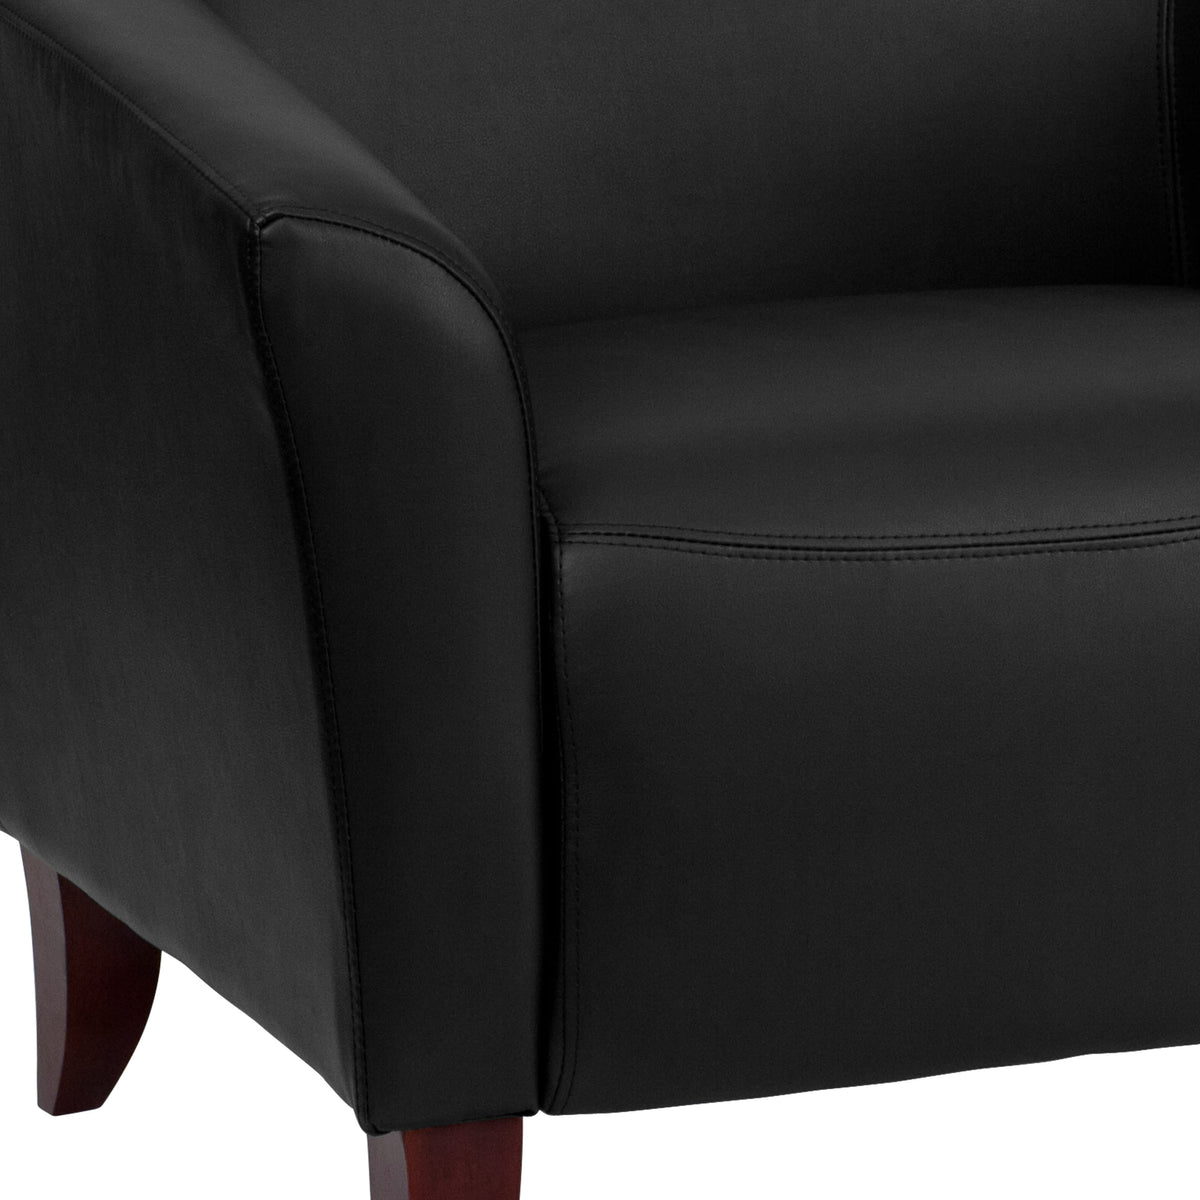 Black |#| Black LeatherSoft Chair with Cherry Wood Feet - Lobby or Guest Seating